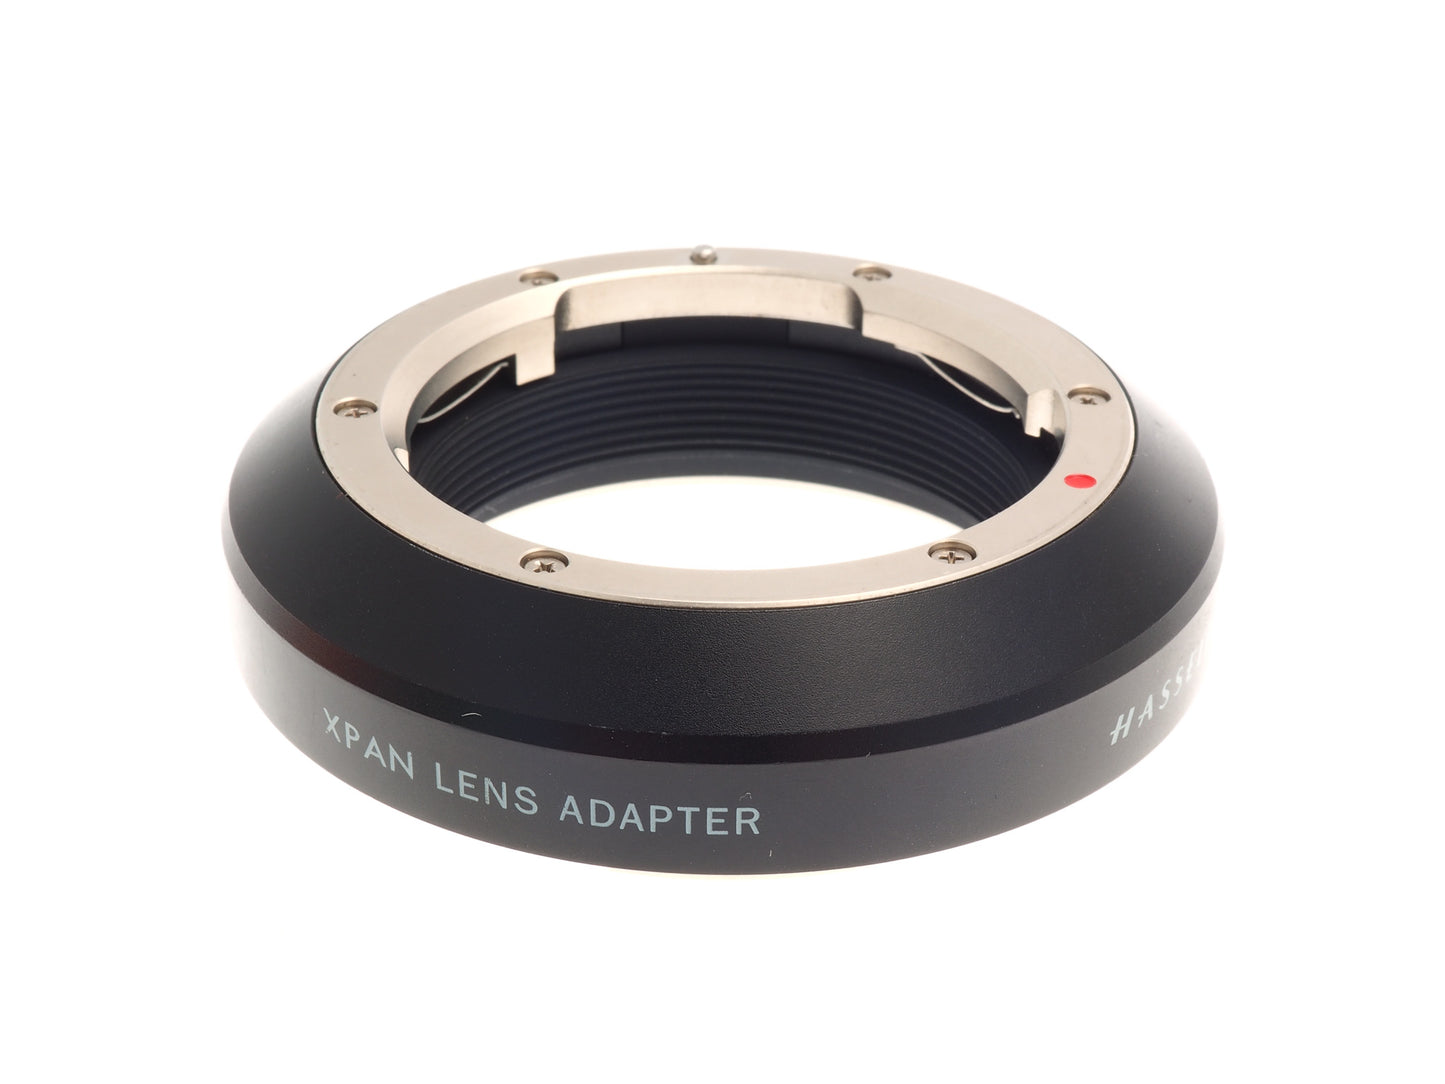 Hasselblad Xpan to X Adapter - Lens Adapter